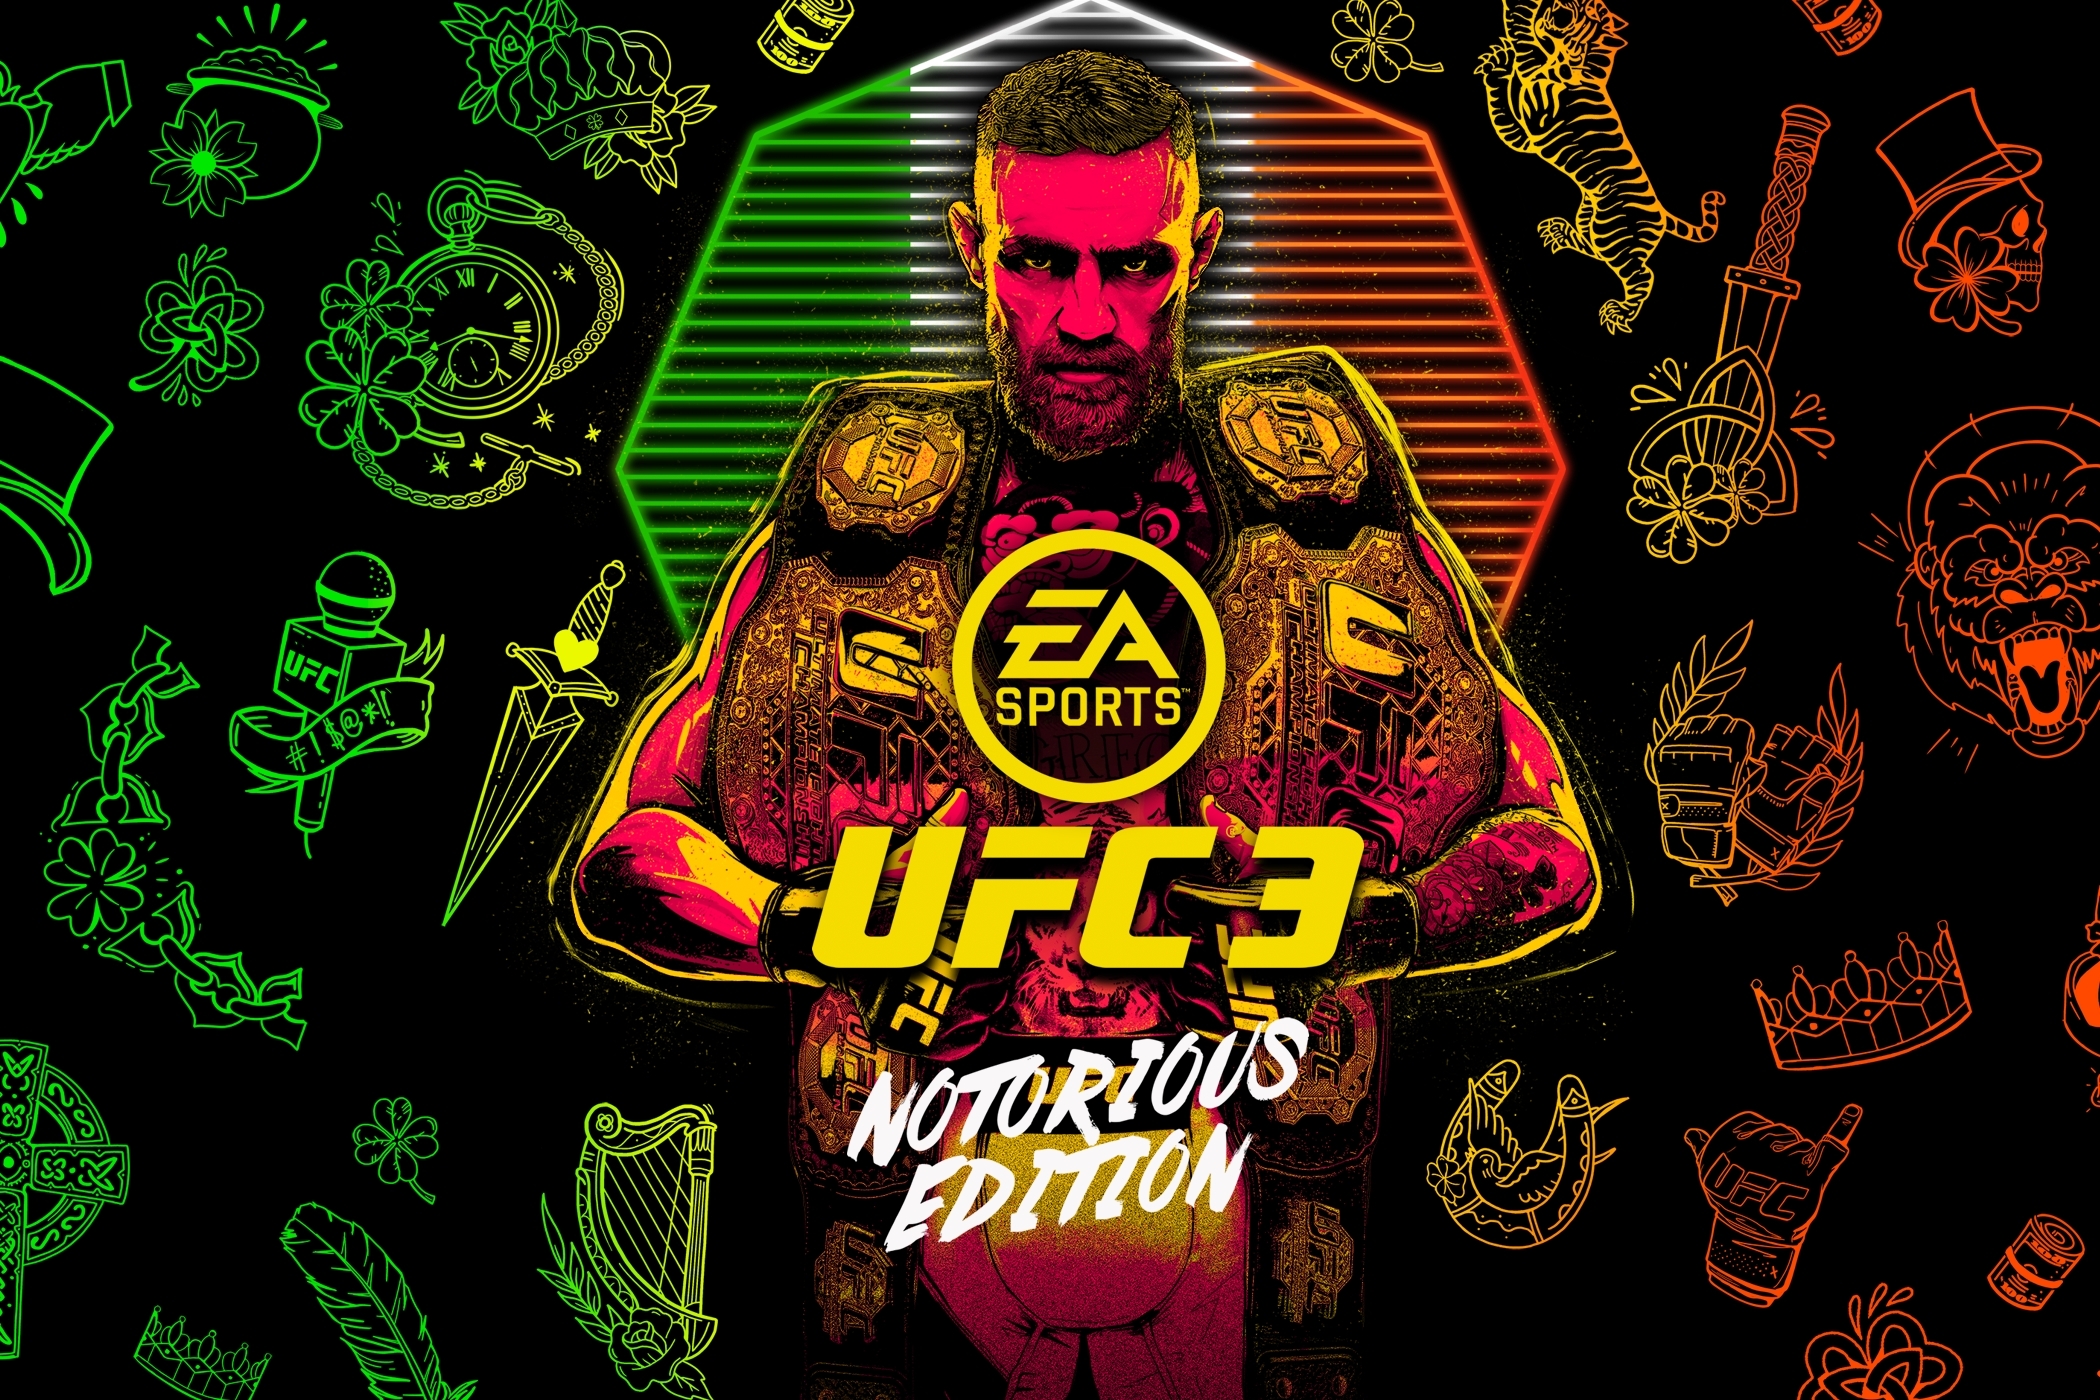 UFC 3 Notorious Edition (EA Sports/Electronic Arts)